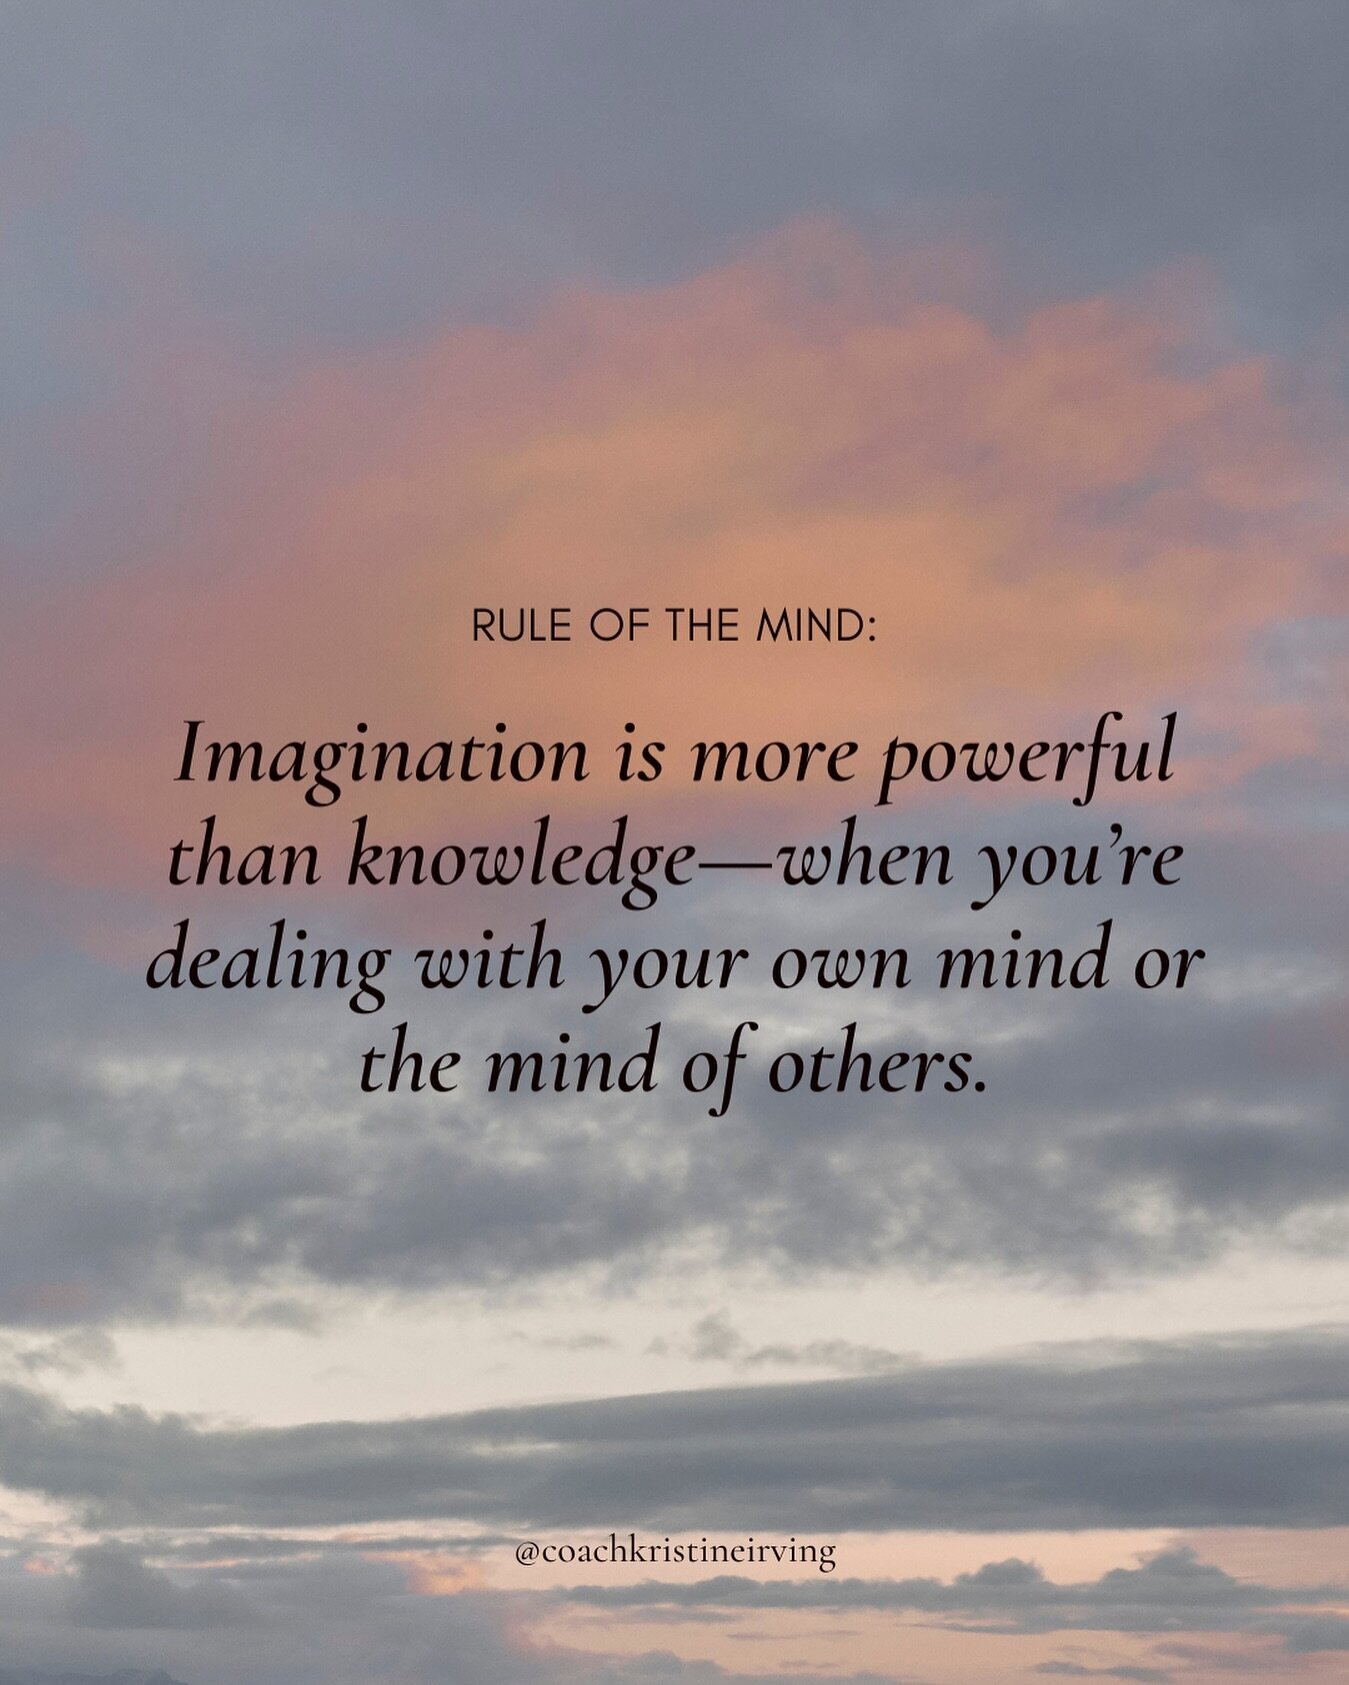 I am fascinated by this rule of the mind. I see evidence of its truth and power daily in my own life and in my clients lives. So why is it that this is probably one of the most difficult concepts for us to grasp? Why is it that when we are faced with